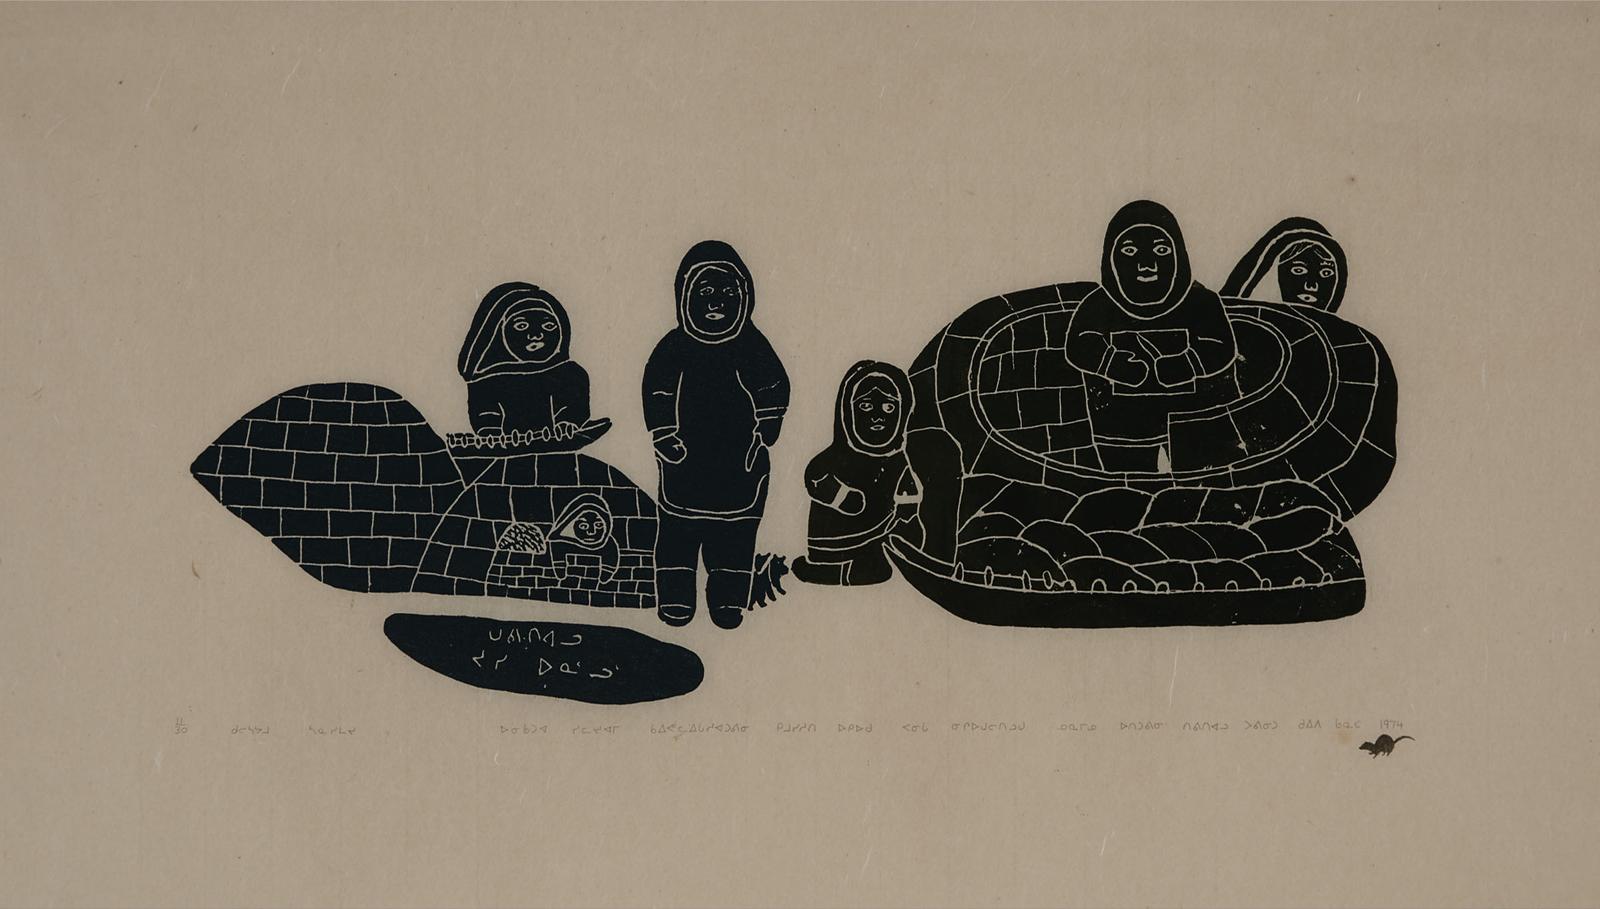 Davidialuk Alasua Amittu (1910-1976) - Family Trying To Go Around The World, They Came Back Home When Their Daughter Was An Old Woman